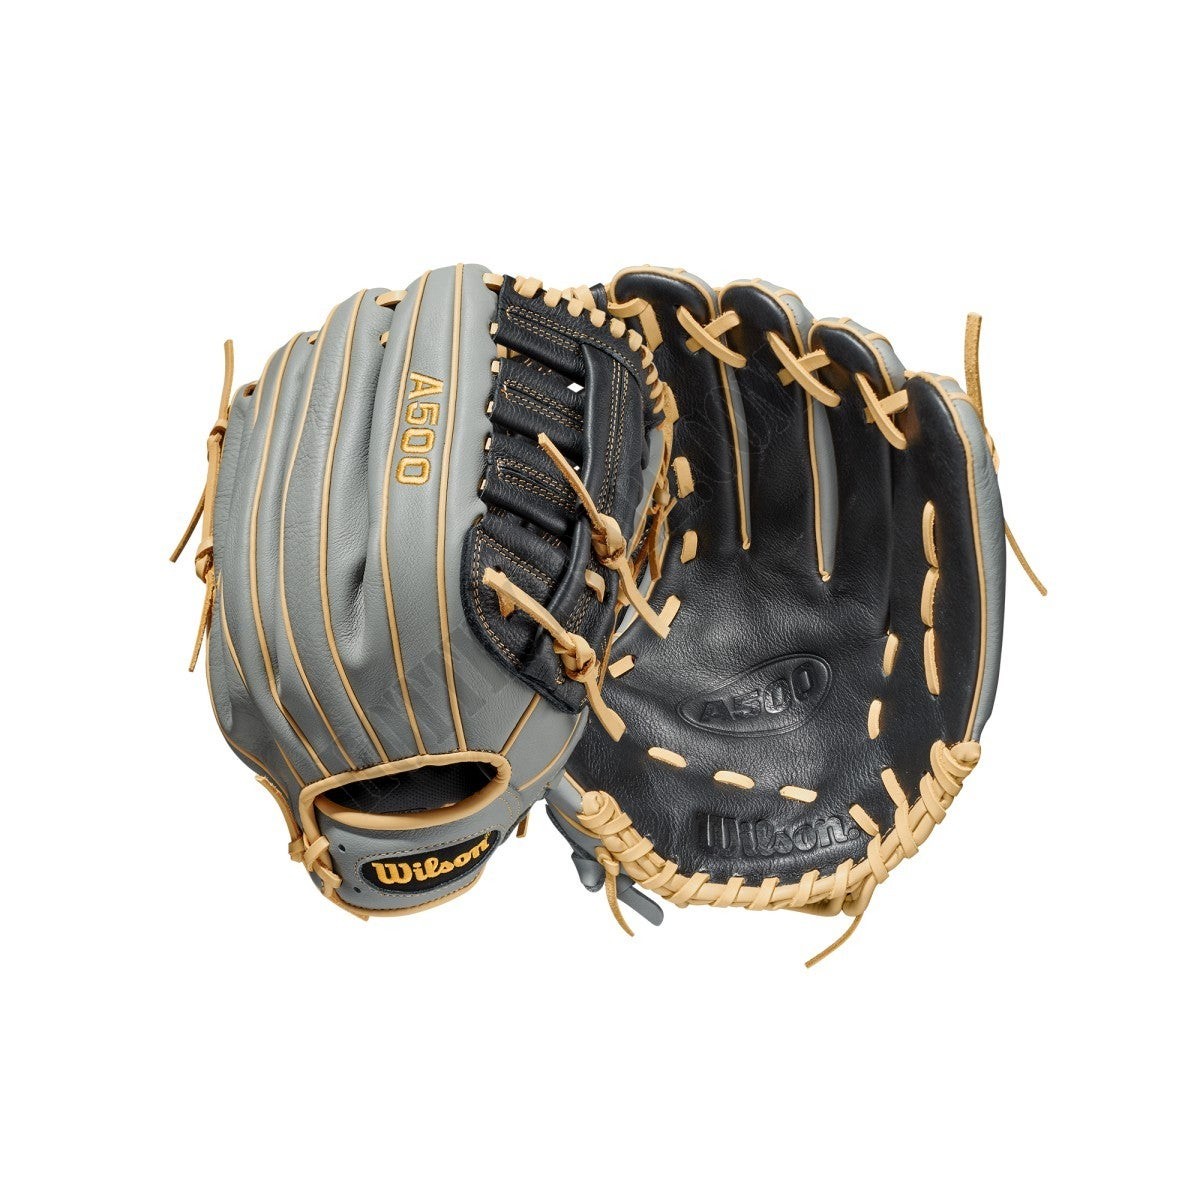 2021 A500 12.5" Outfield Baseball Glove ● Wilson Promotions - 2021 A500 12.5" Outfield Baseball Glove ● Wilson Promotions